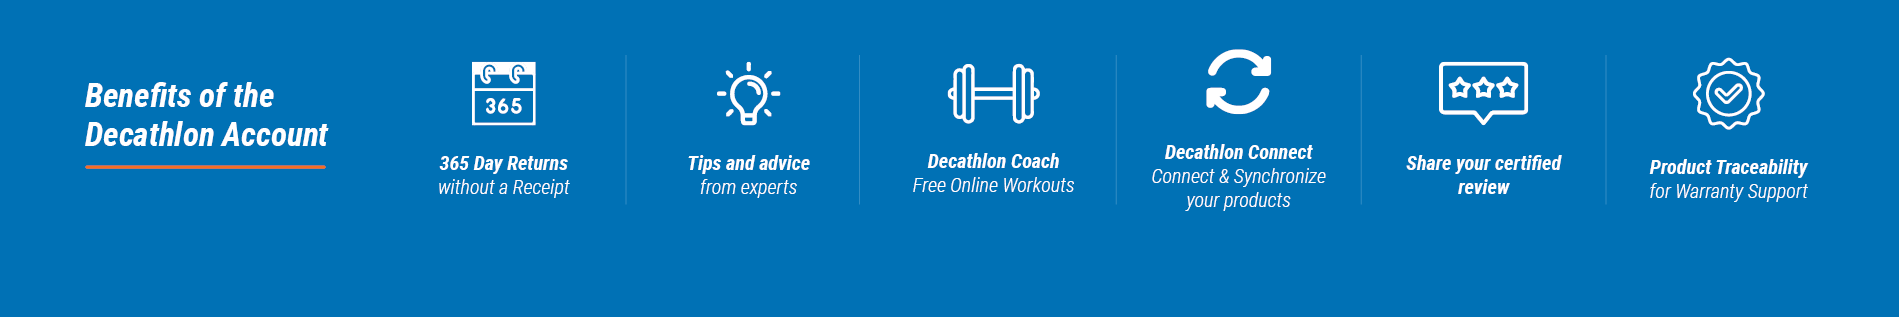 image of benefits of the decathlon account